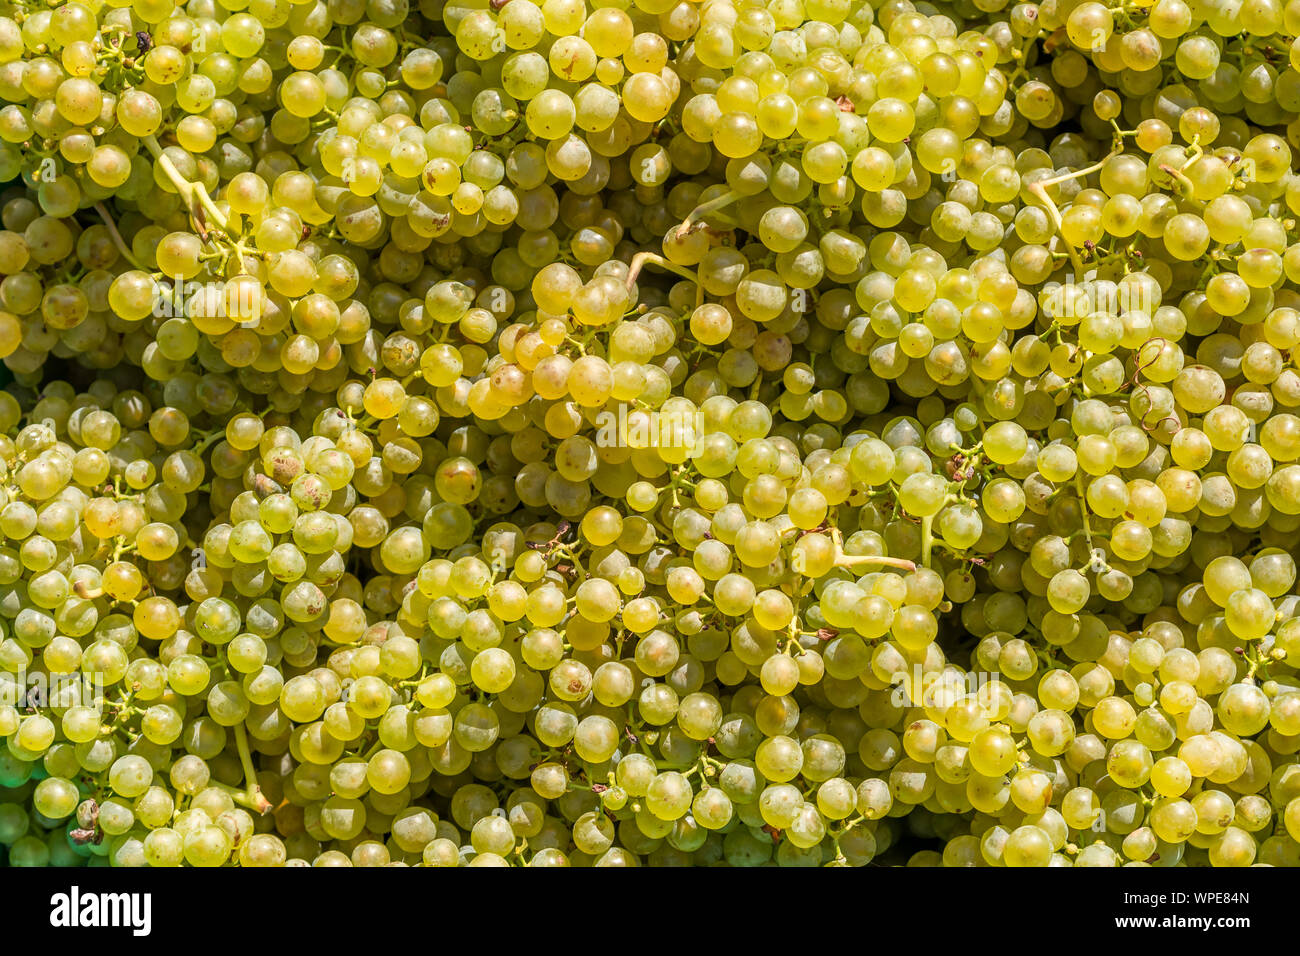 Large amount of grapes after the harvest Stock Photo